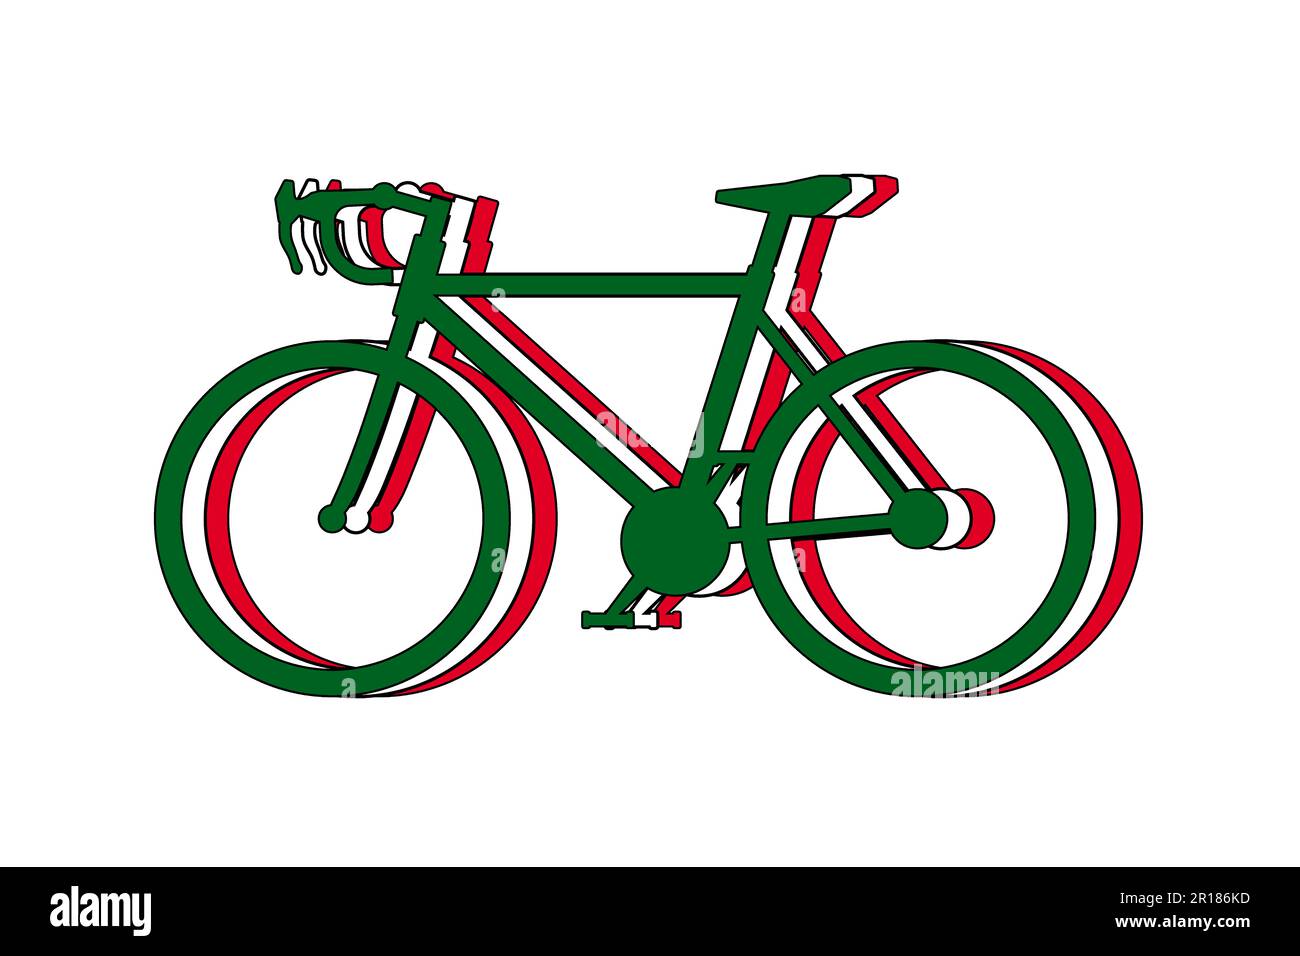 Giro d'Italia, bicycles in silhouette with the three colors of the flag green white and red, like the Italian tricolor. Neutral background Stock Photo